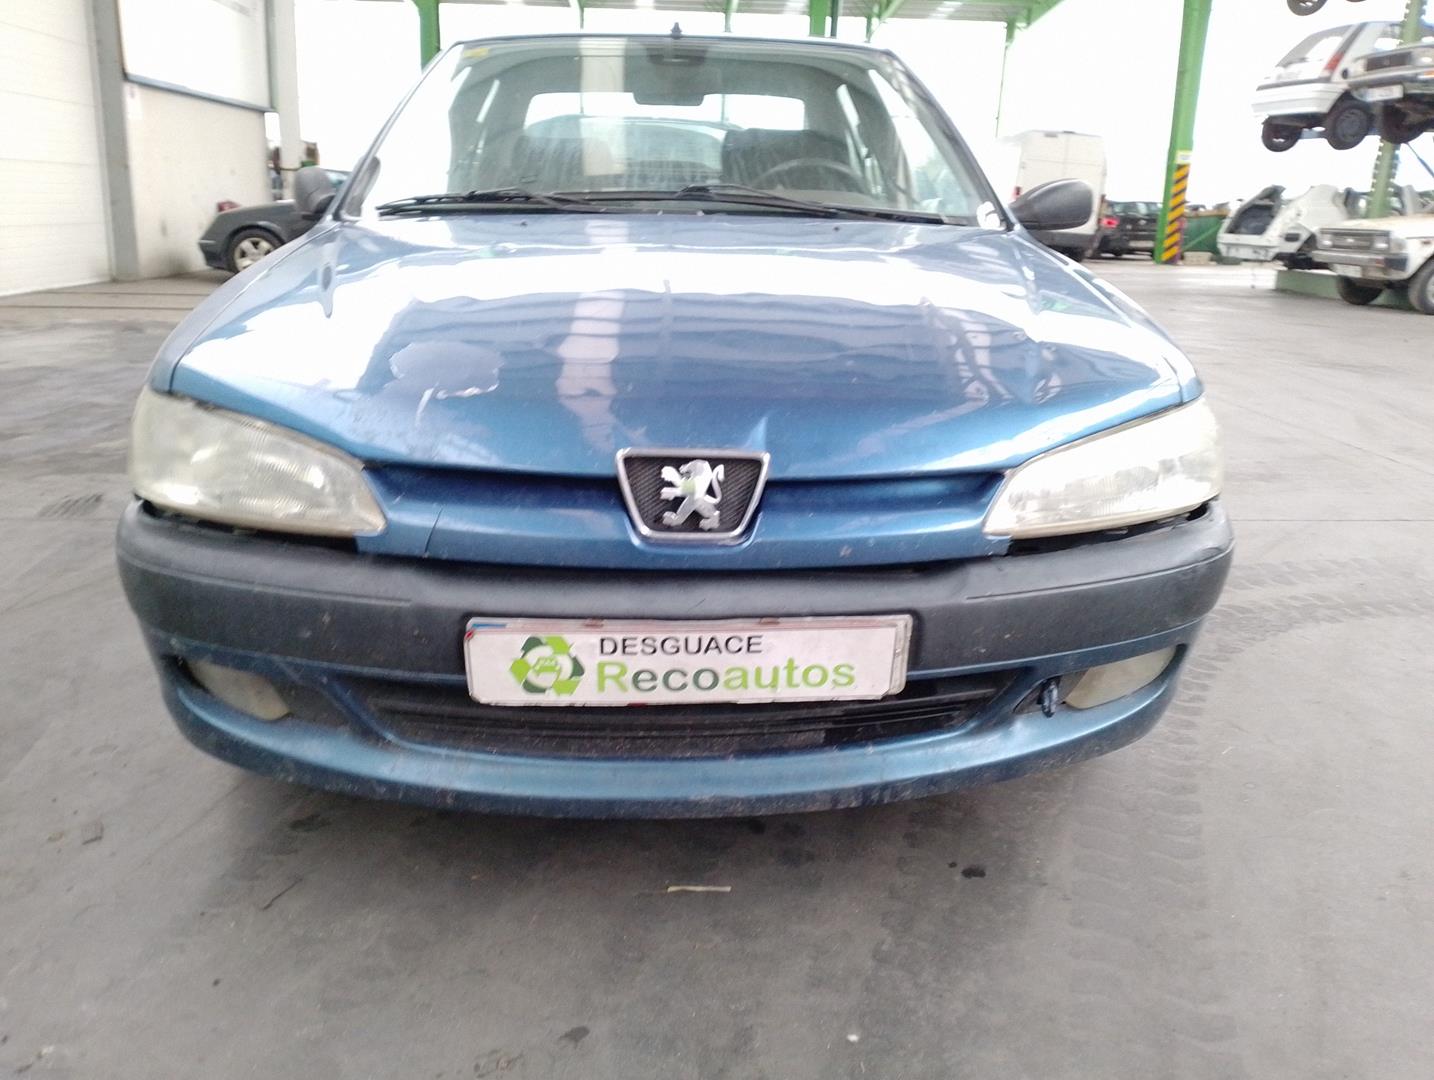 PEUGEOT 306 1 generation (1993-2002) Other Control Units 9625452380, 09731139900, MARWAL 24172275